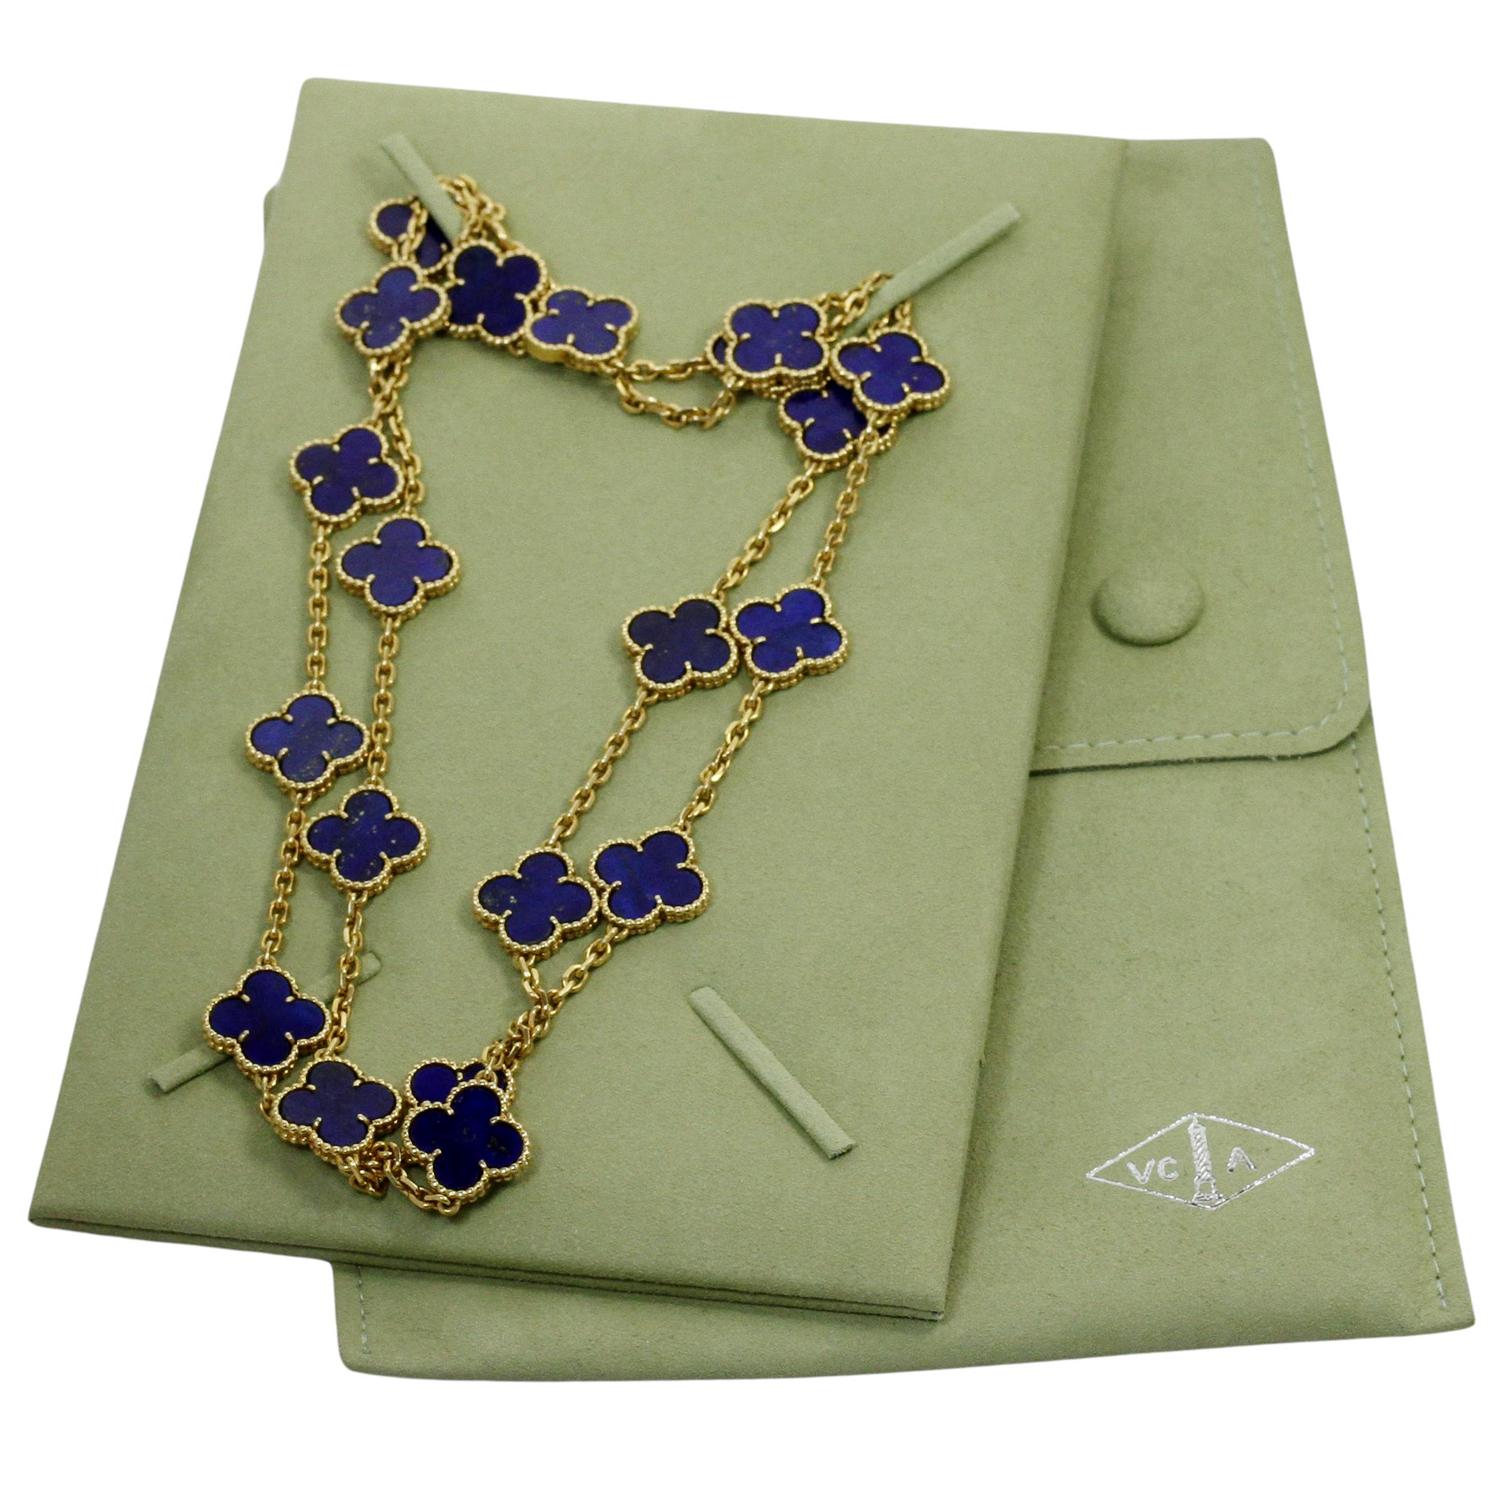 This gorgeous rare Van Cleef & Arpels 20-motif lucky clover necklace from the iconic Alhambra collection is crafted in 18k yellow gold and inlaid with blue lapis lazuli in round bead settings. Made in France circa 1980s. Measurements: 0.59